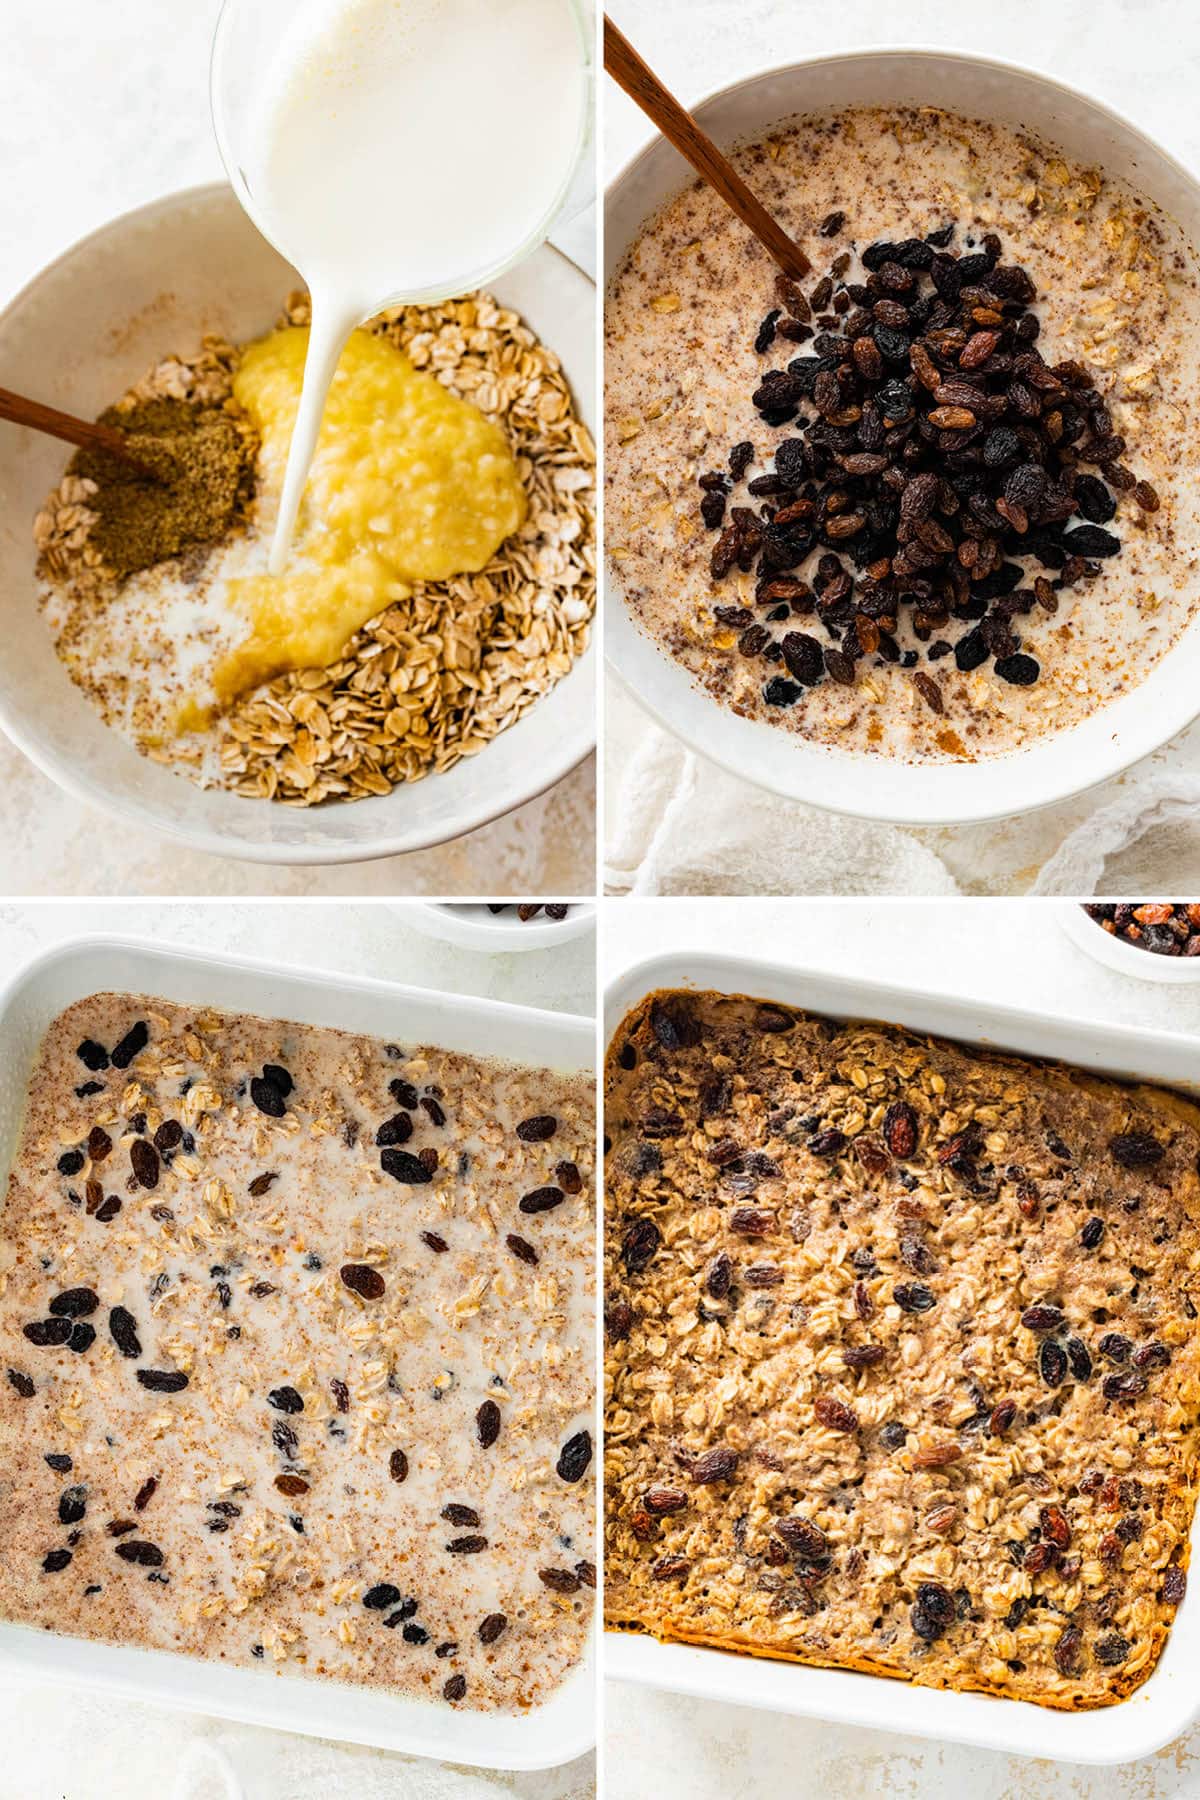 Collage of four photos showing how to make Cinnamon Raisin Baked Oatmeal: mixing the banana, oats, milk and flaxseed, adding the raisins, pouring the mixture into a baking dish and baking until golden brown.